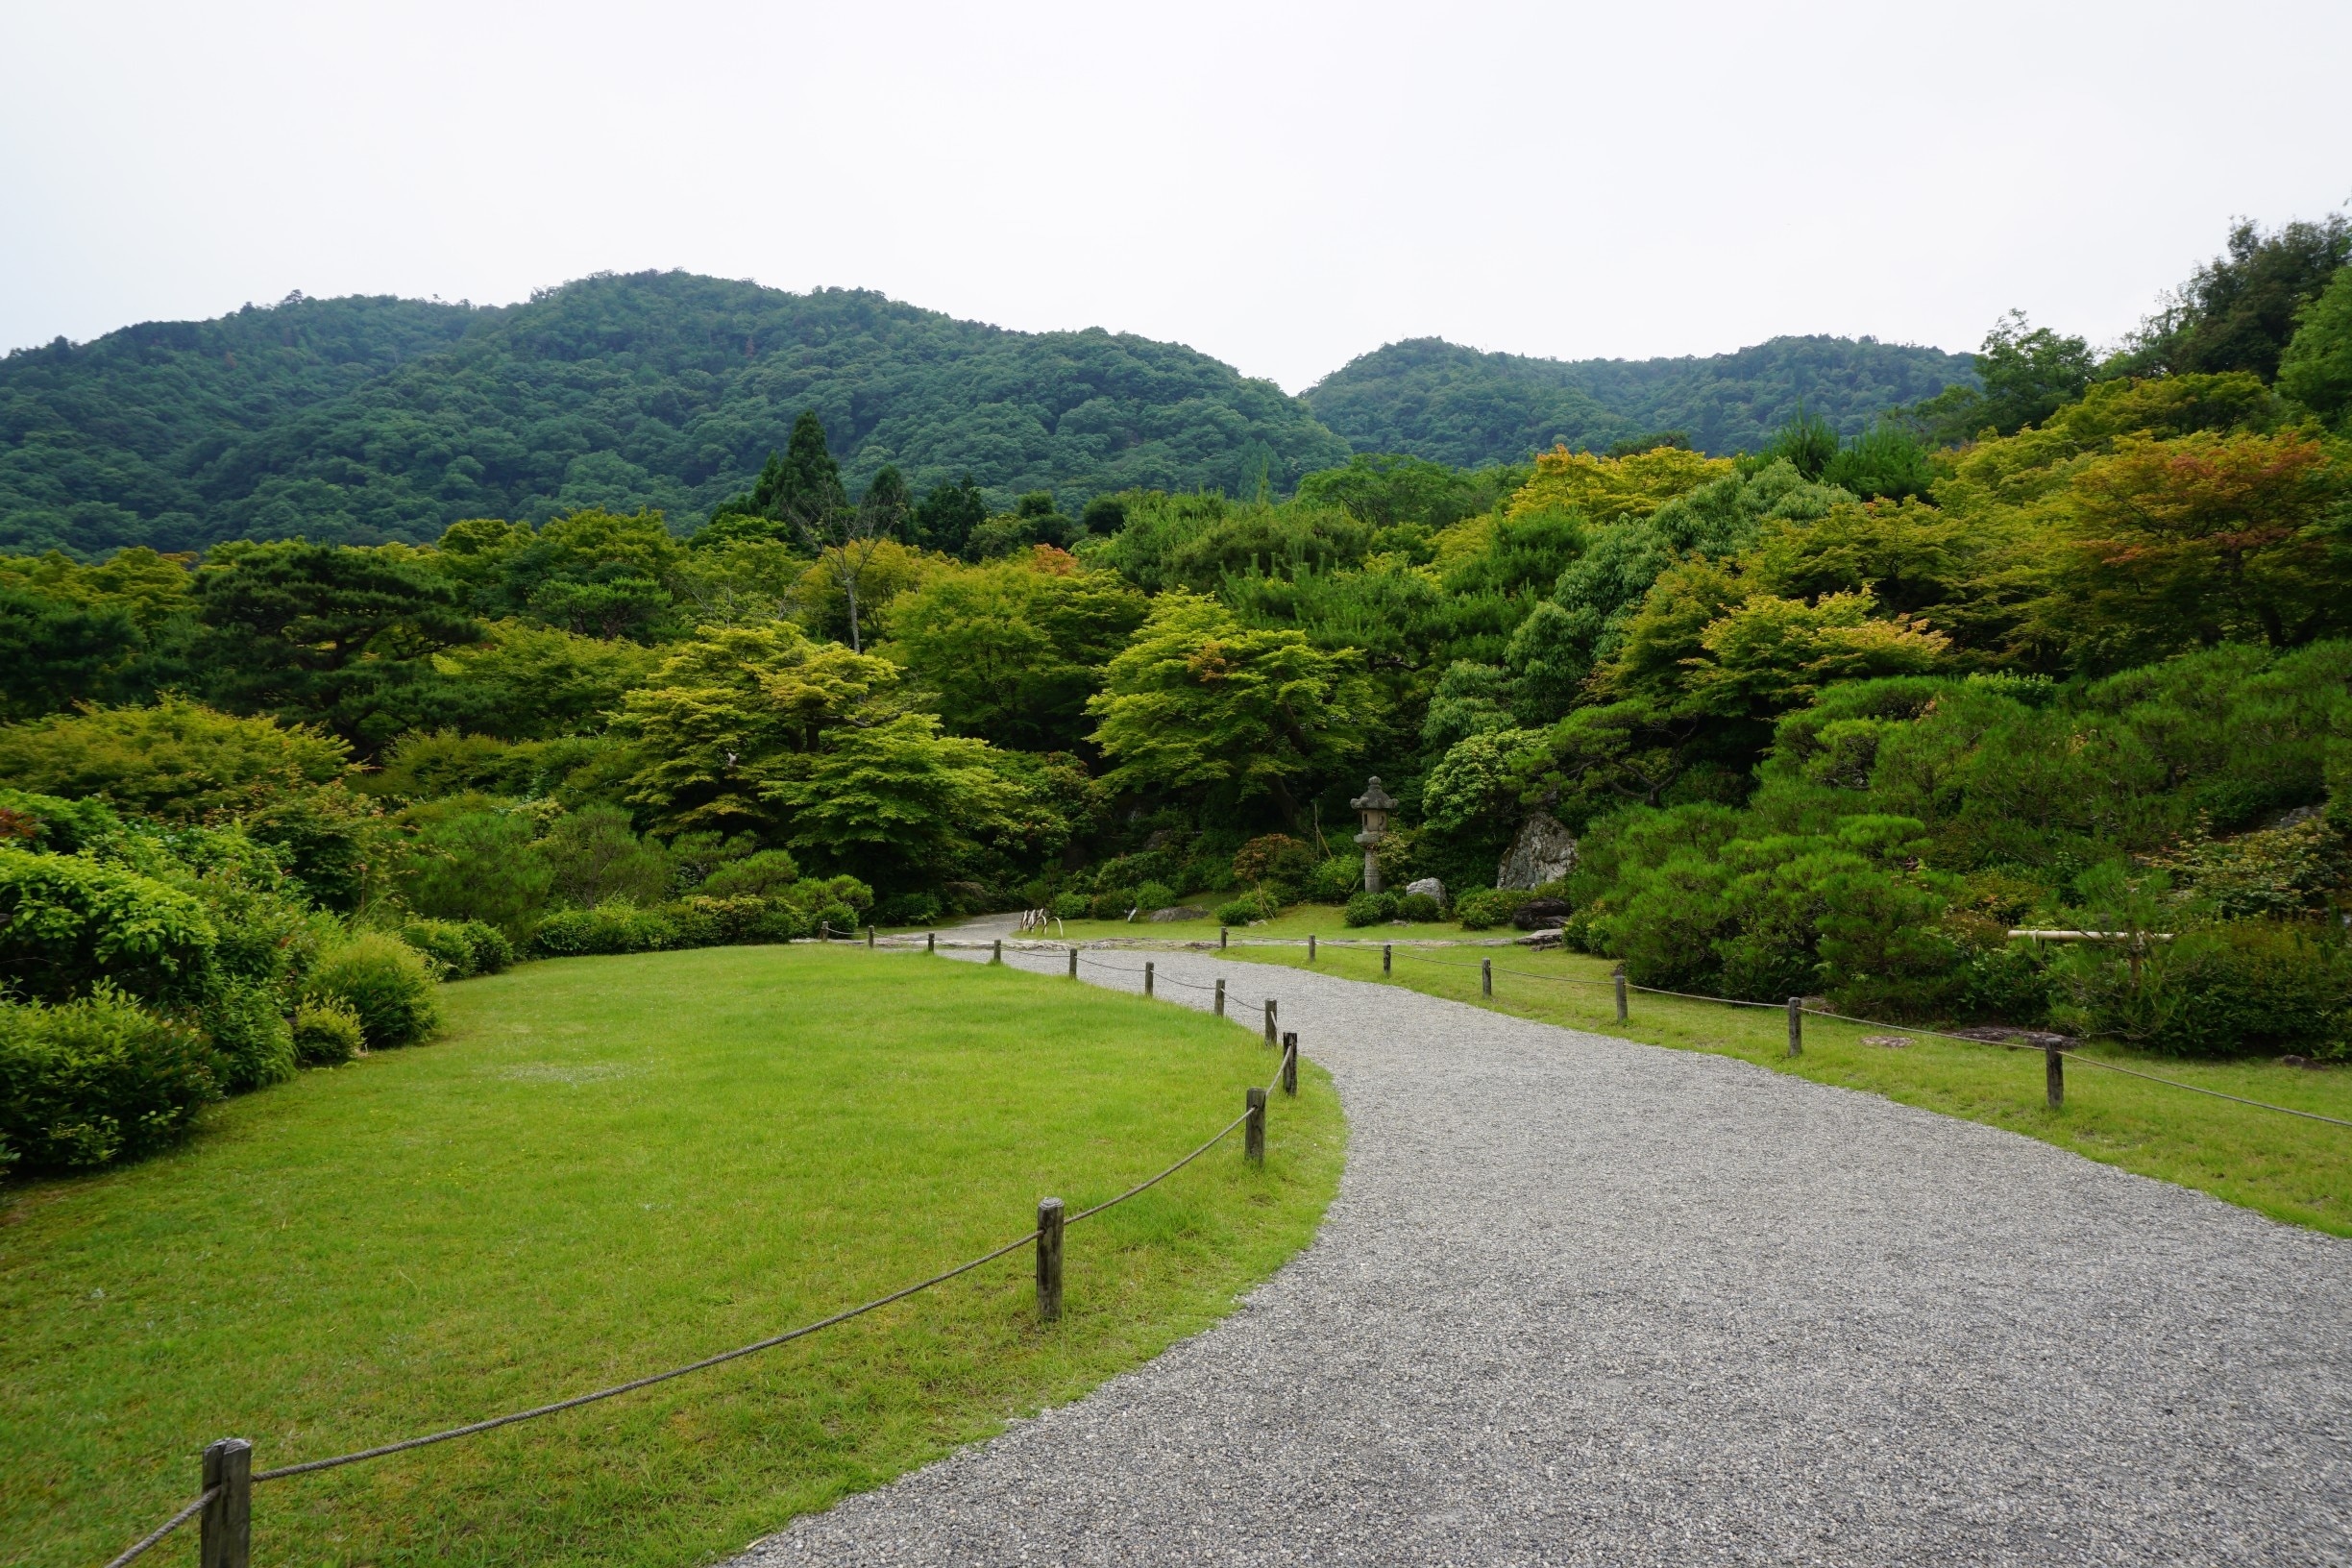 Don't let the entrance fee of 1,000 JPY scare you away from this unbelievable gem. The gardens itself are lovely as well as the gorgeous views of the mountains nearby. At the end of your visit you are served complimentary green tea and a biscuit cookie.

#kyoto #japan #bestof5 #colorful #green